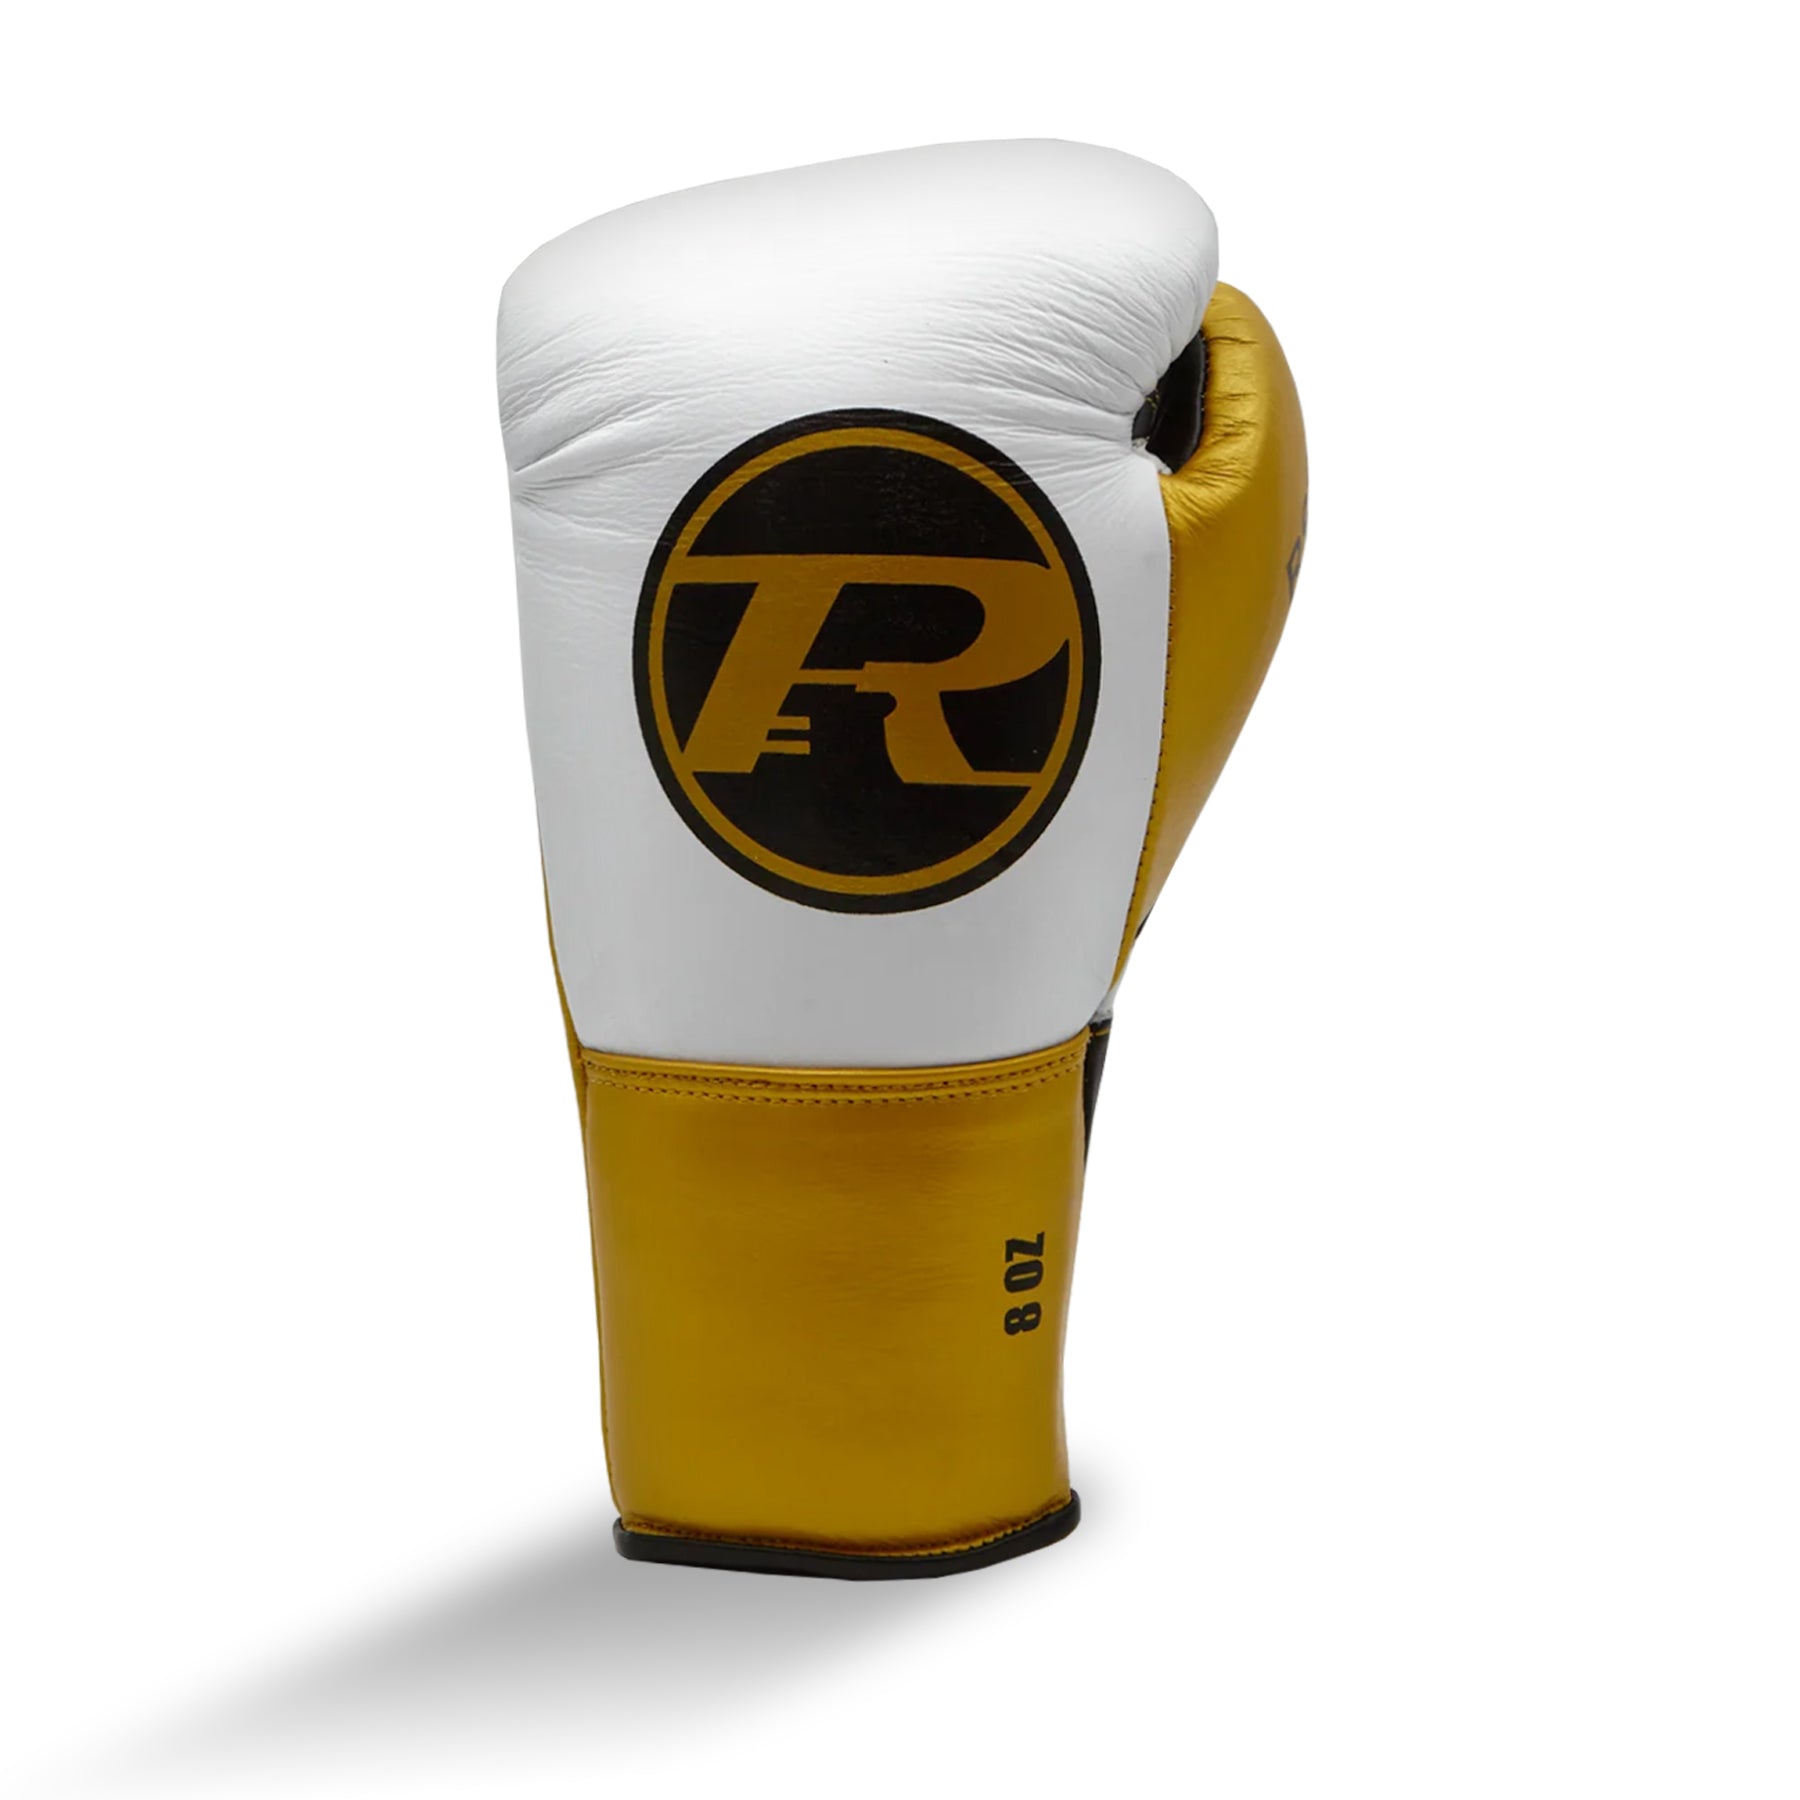 Ringside Boxing UK Pro Contest Glove RS2 White / Gold  